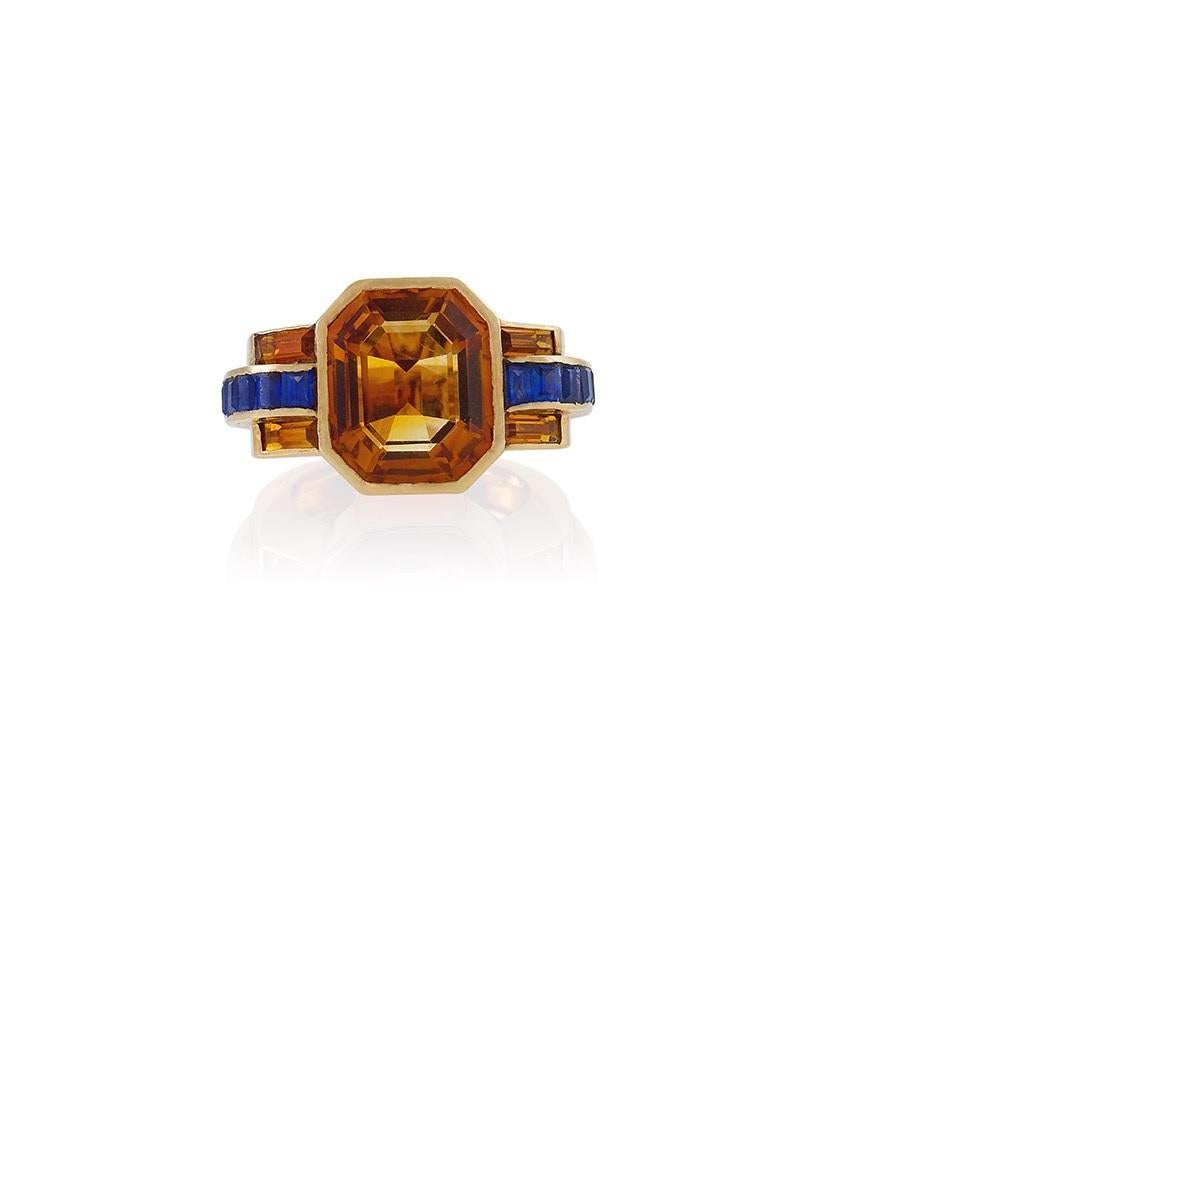 An Art Deco citrine and sapphire ring by Boucheron Paris. This handsome, architecturally striking ring features a center rectangularly-cut and warmly-colored citrine in an 18 karat gold bezel setting, flanked by two raised shoulders of sapphires and